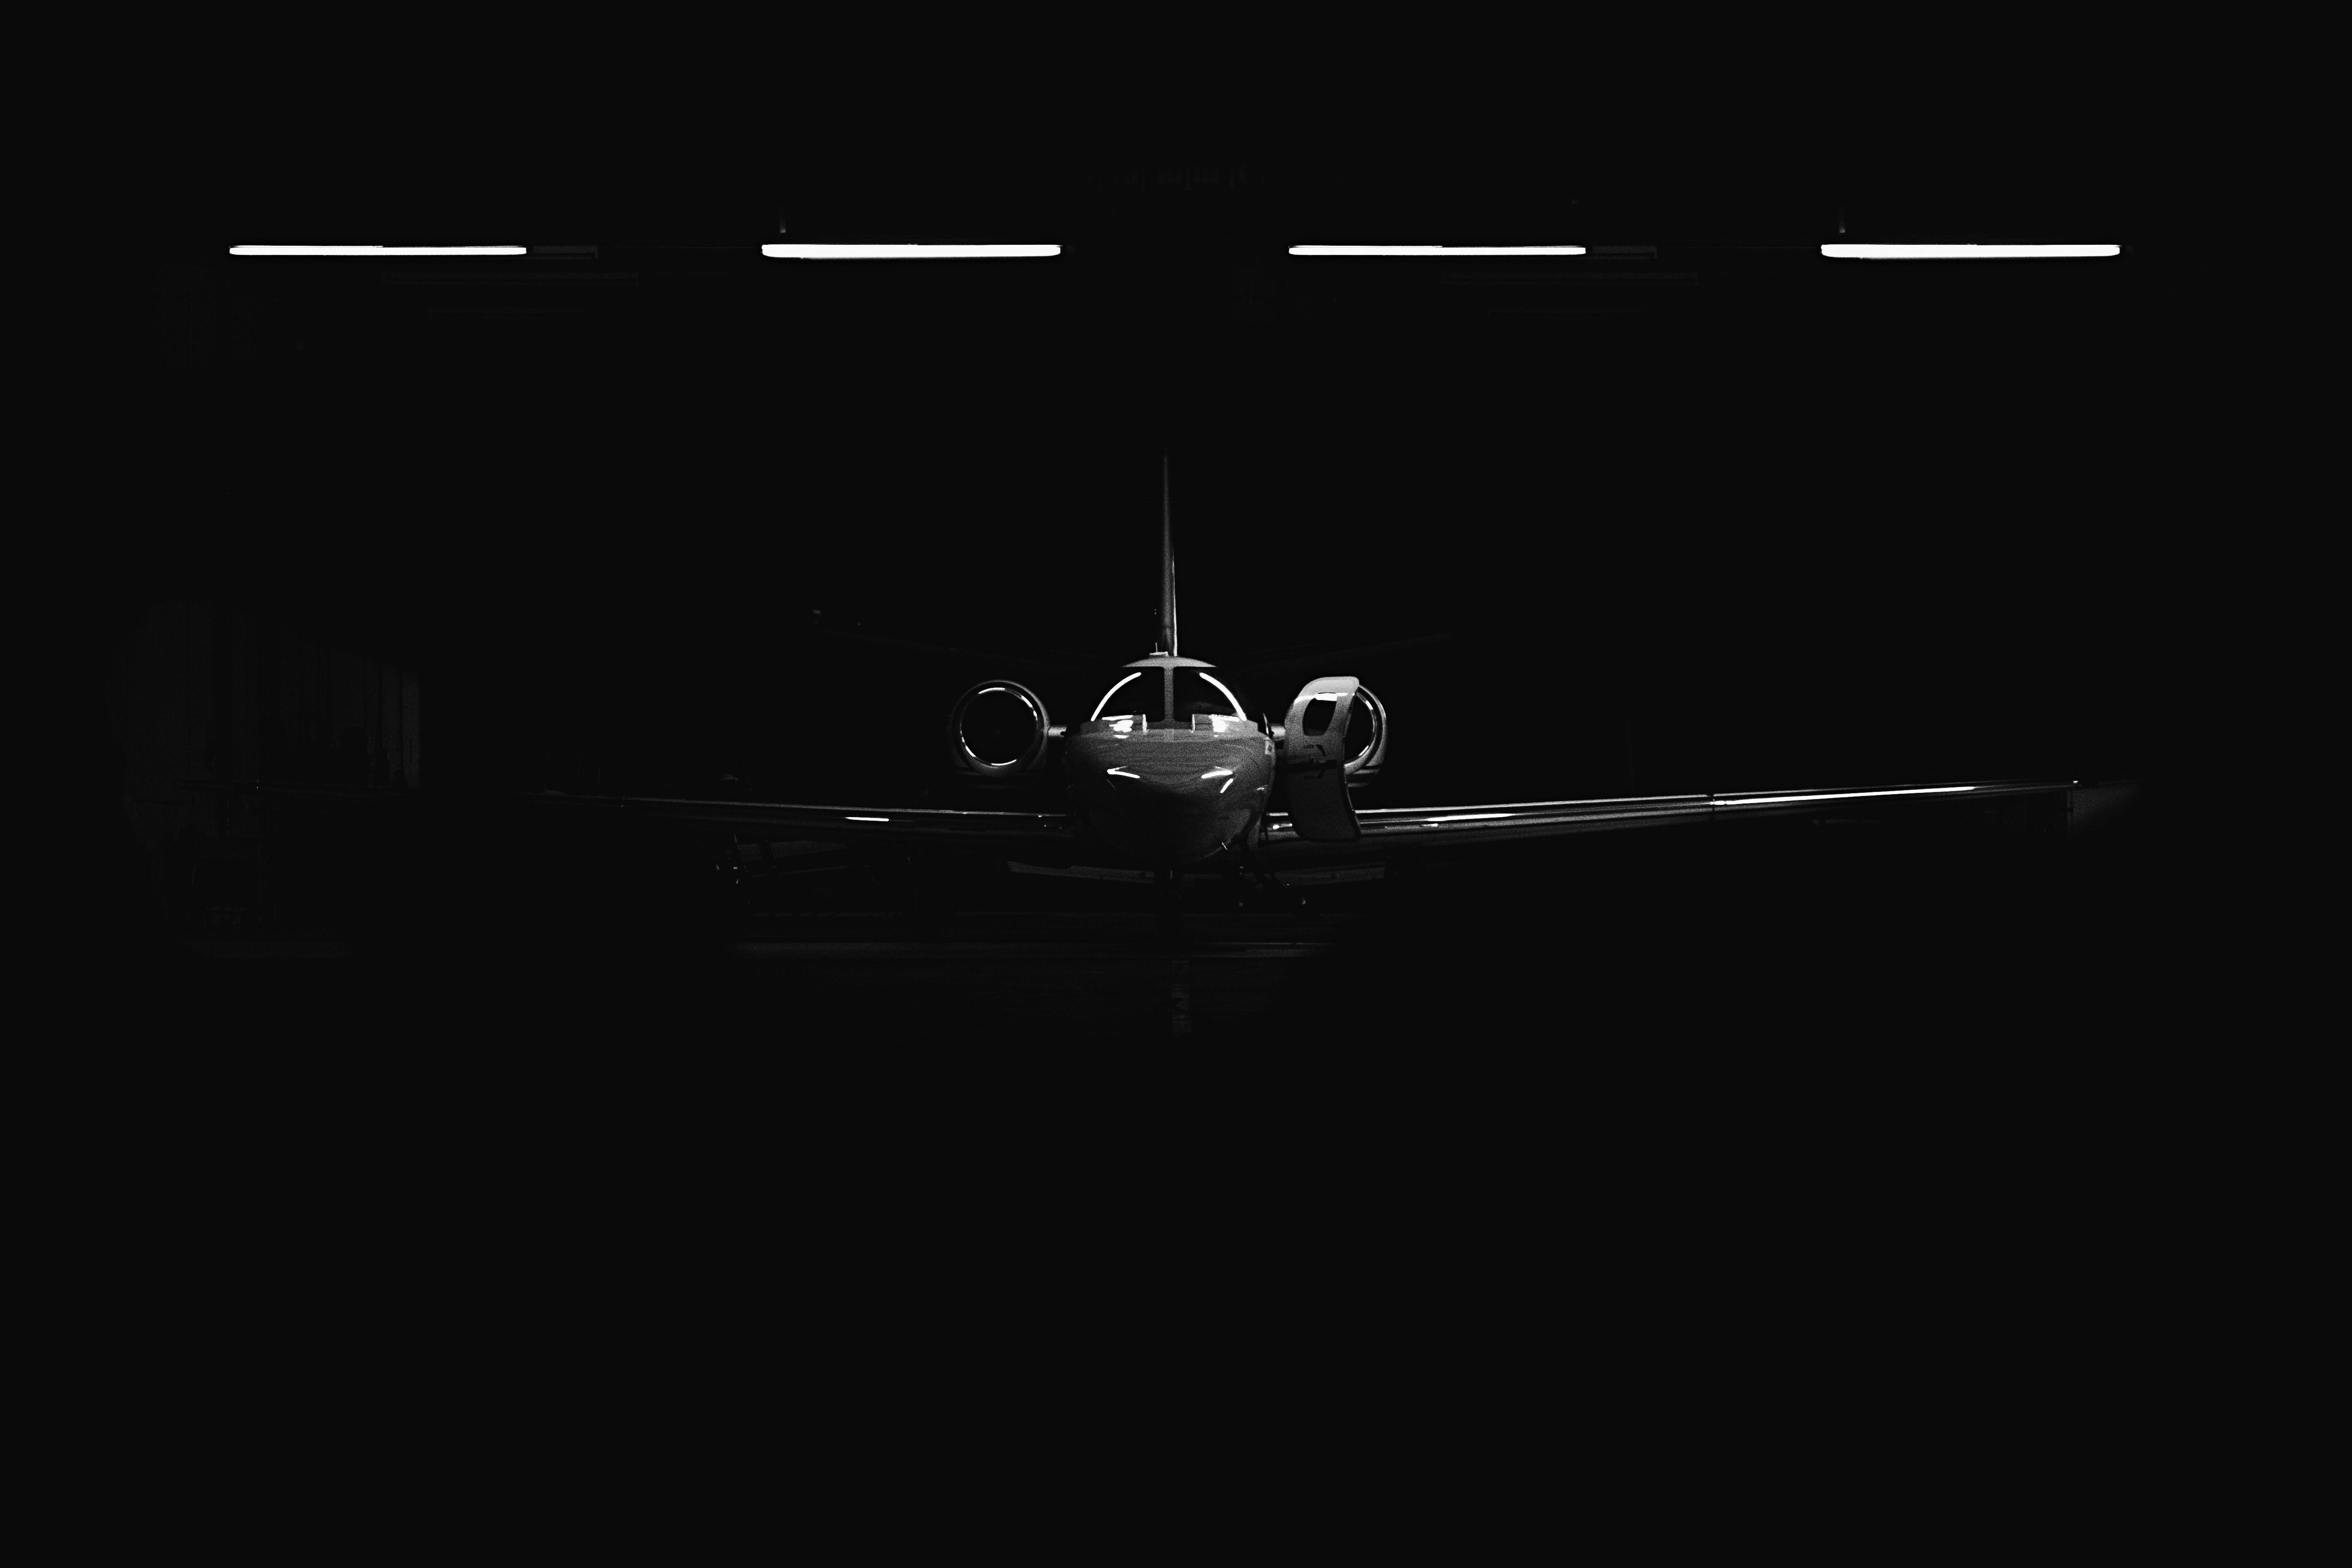 Black And White Airplane Wallpapers - Top Free Black And White Airplane